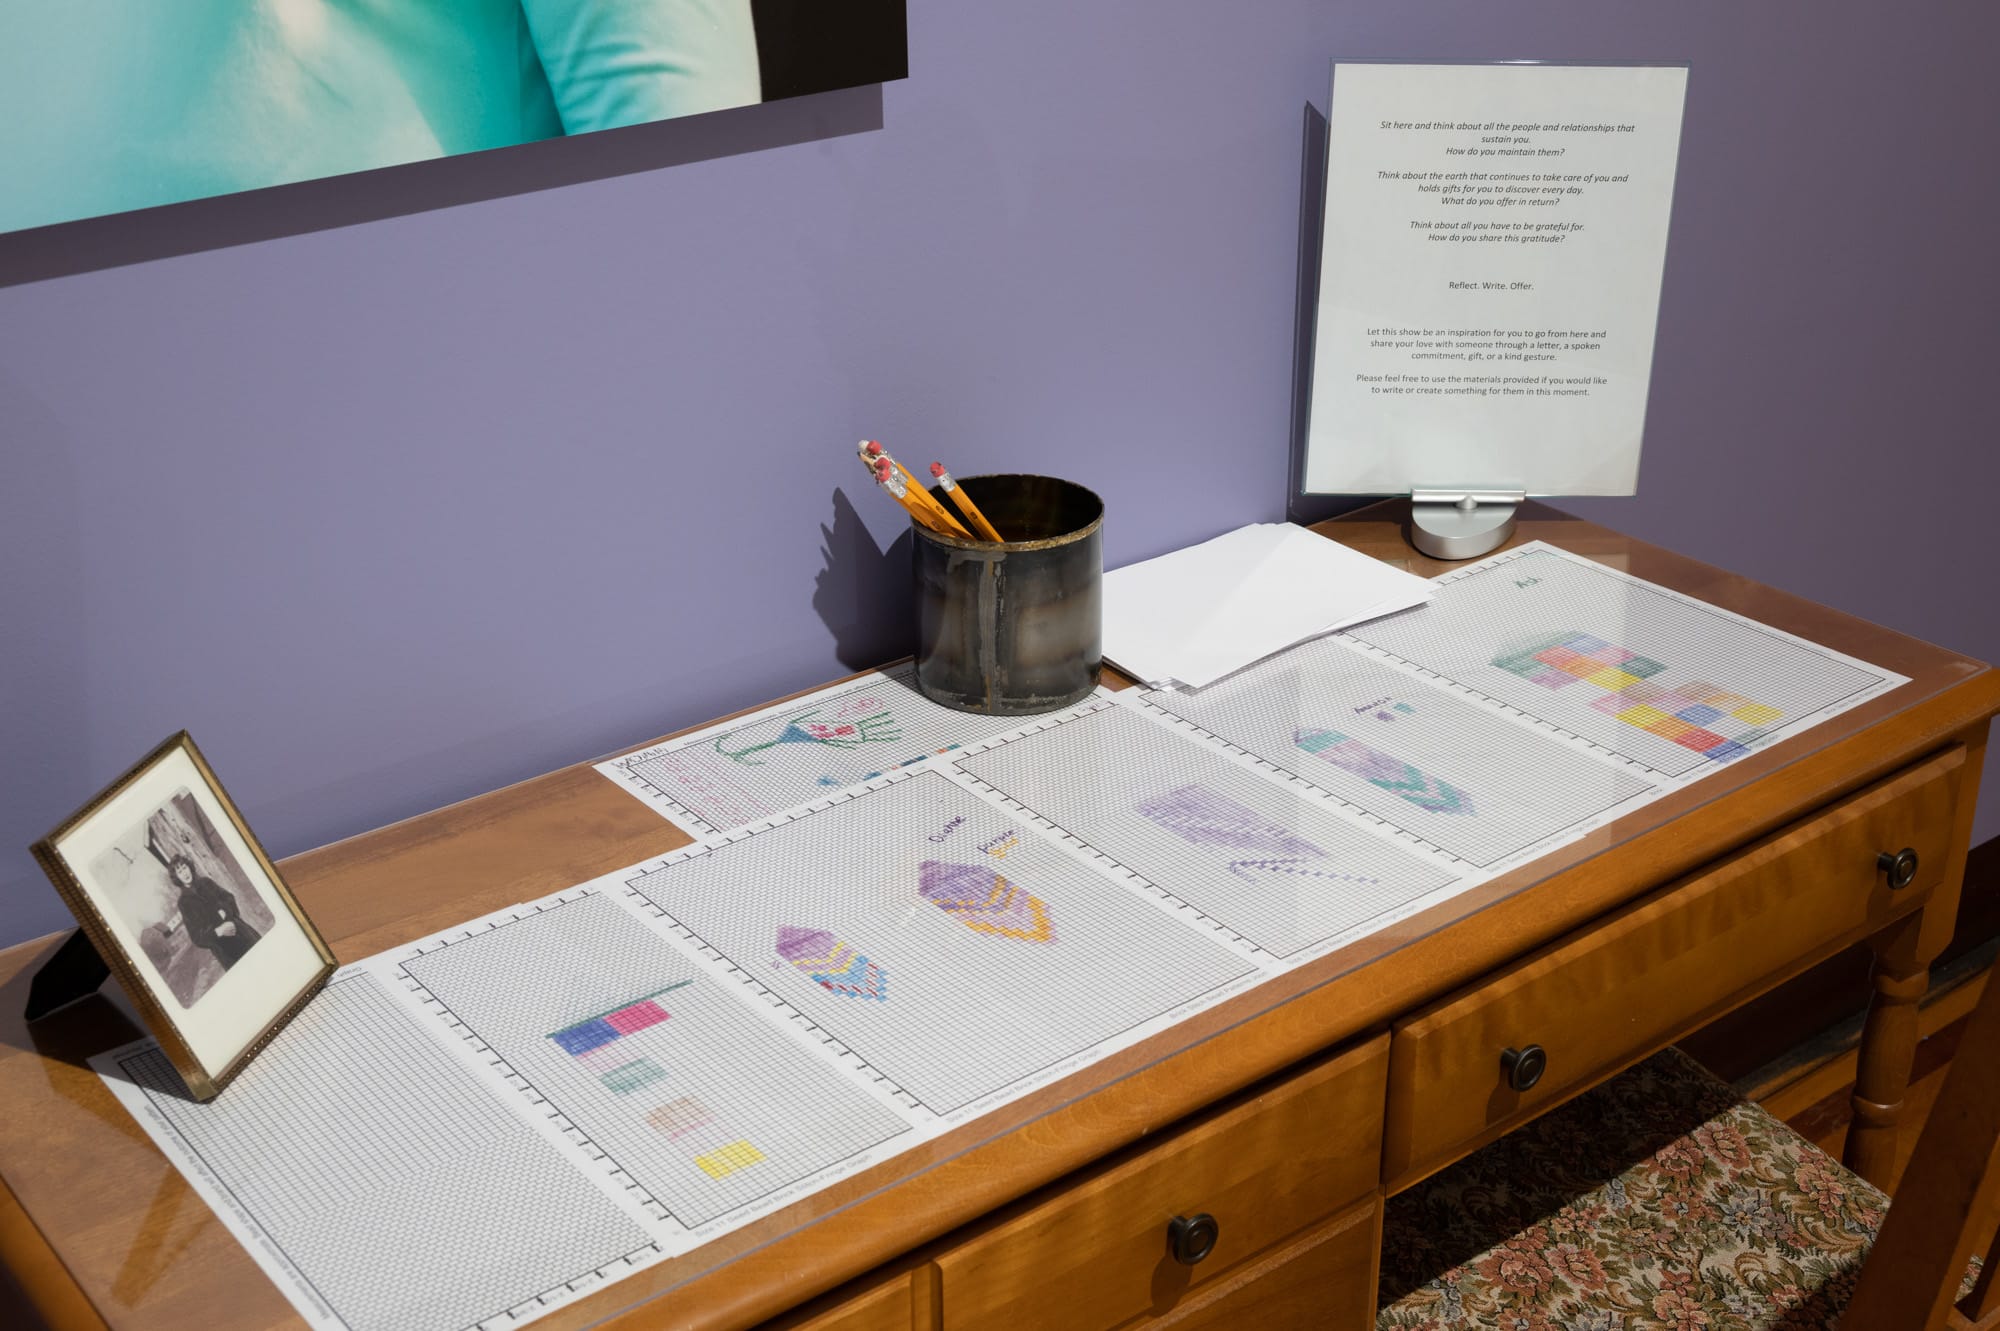 A desk with design sheets for beaded earrings under Plexiglas. A cup of pencils and paper are on the desk.